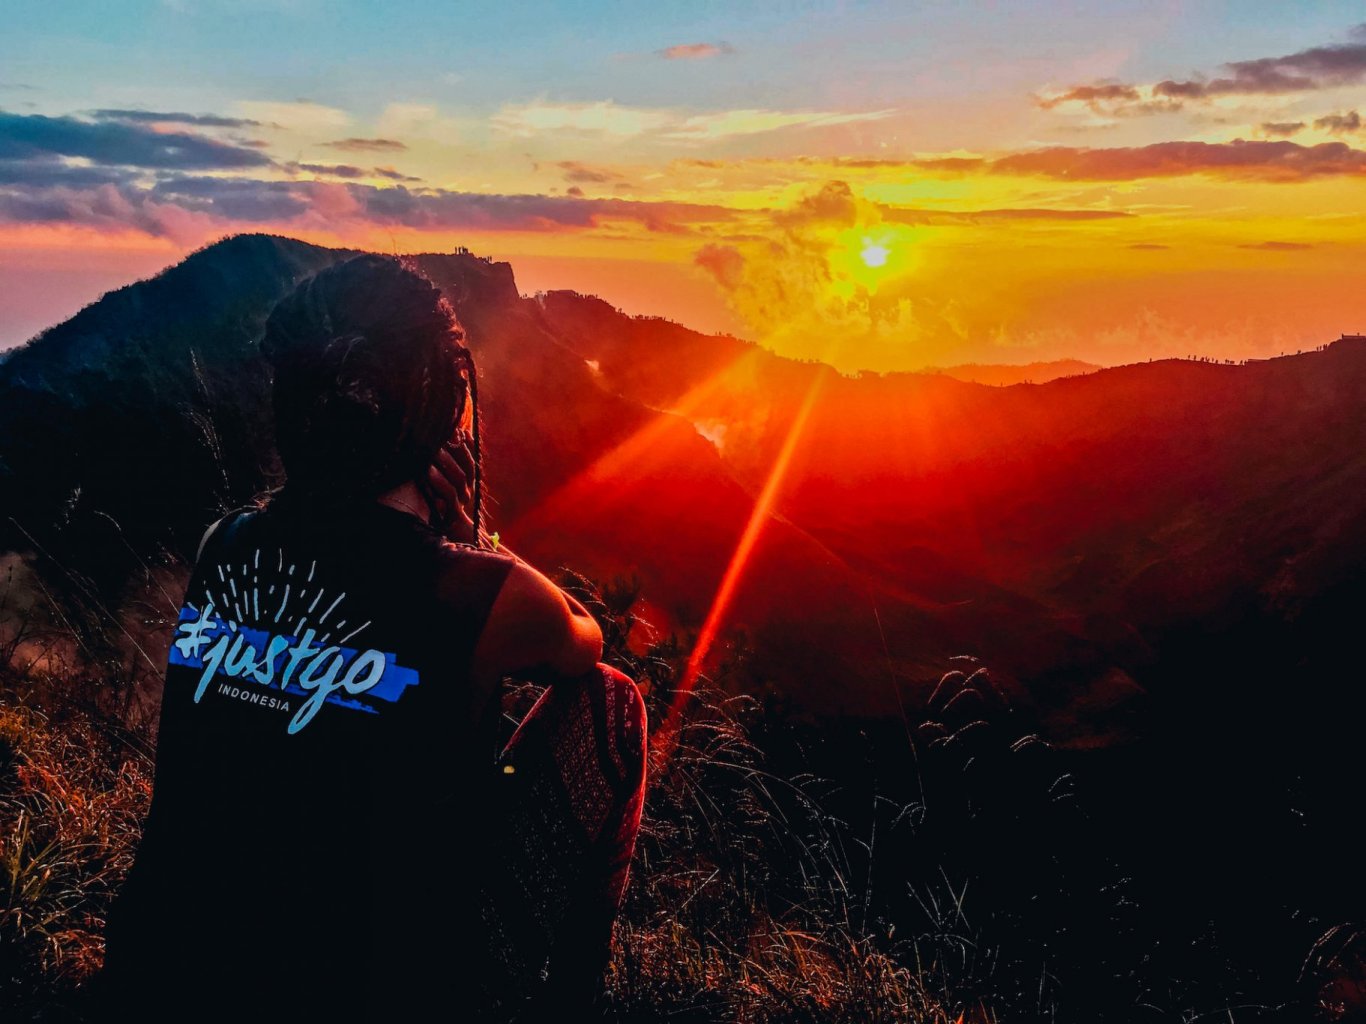 A shot of someone sitting and watching the sunrise over the mountains after hiking Mount Batur in Bali, Indonesia 